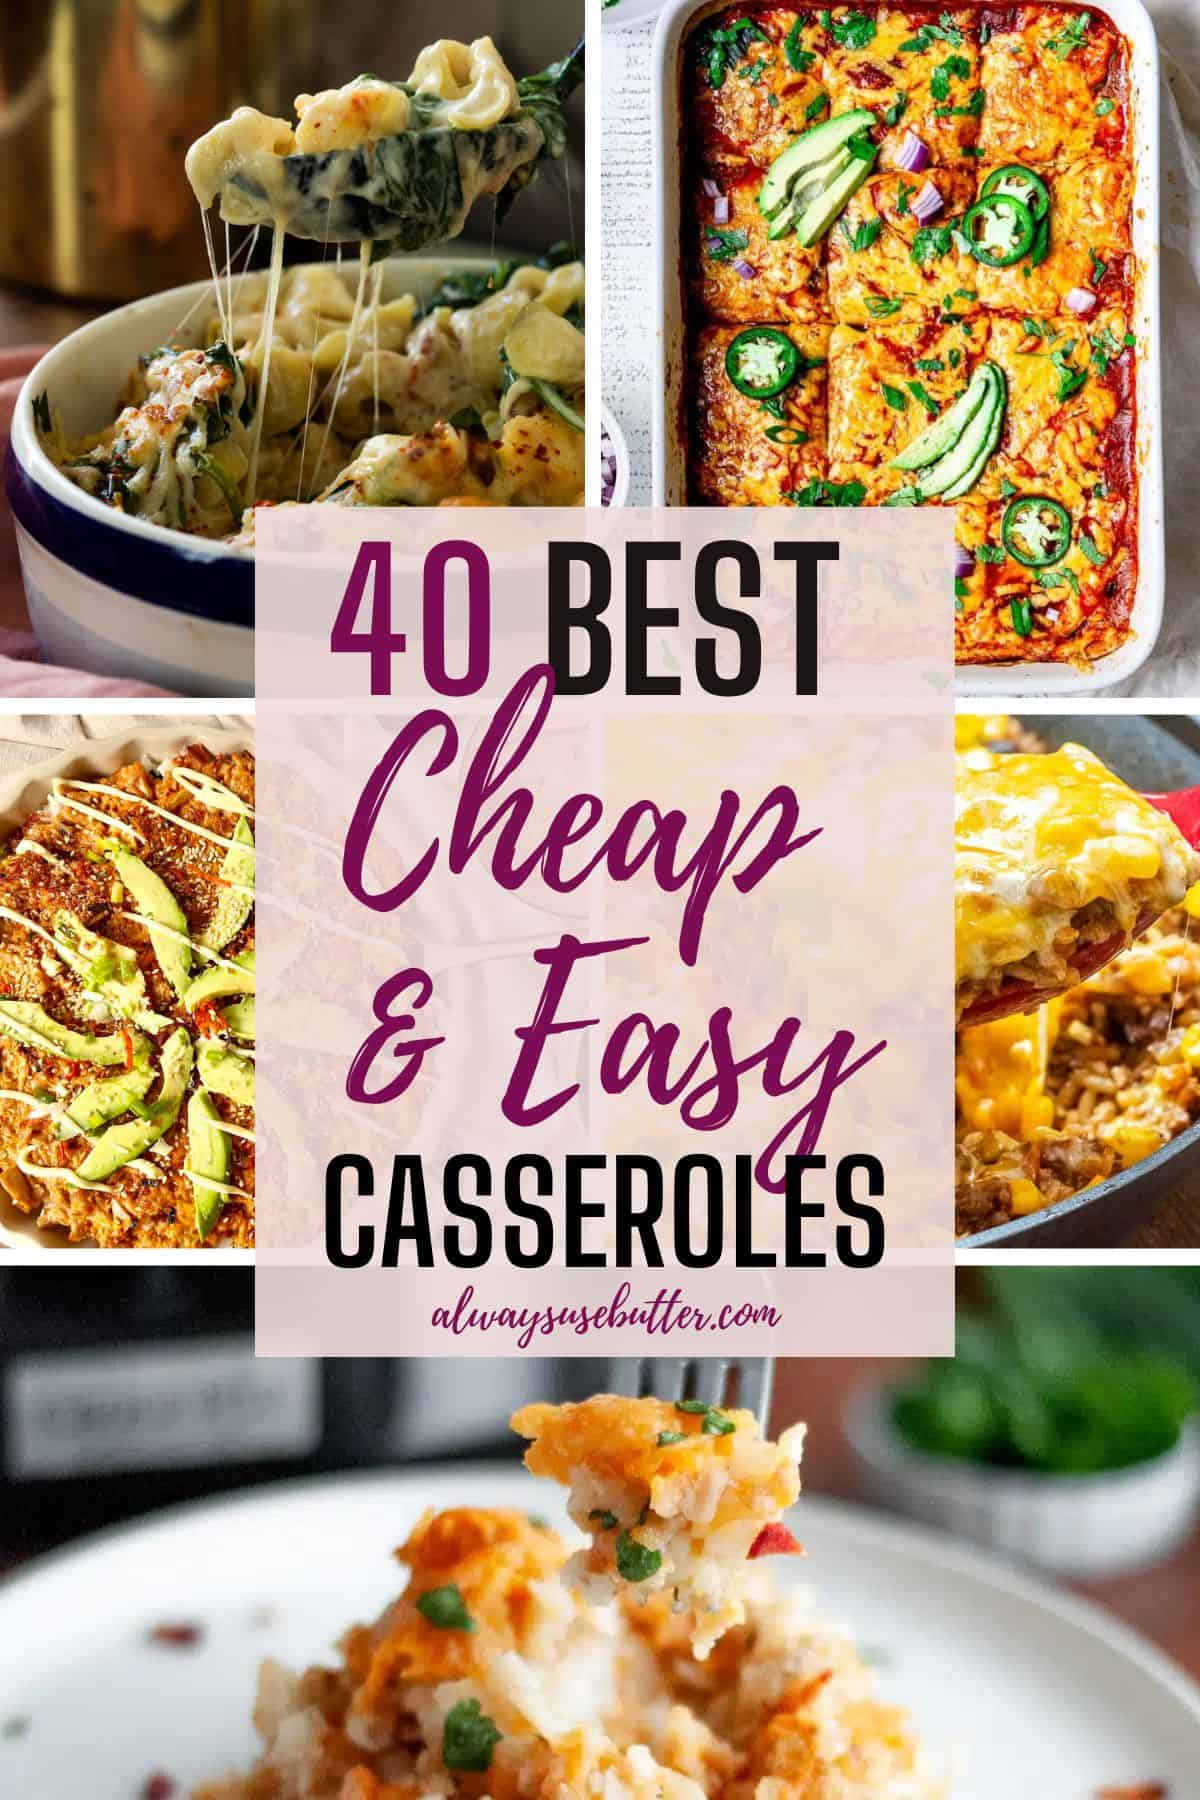 Casseroles: 50+ Recipes to Make Your Sunday Perfectly Cozy!